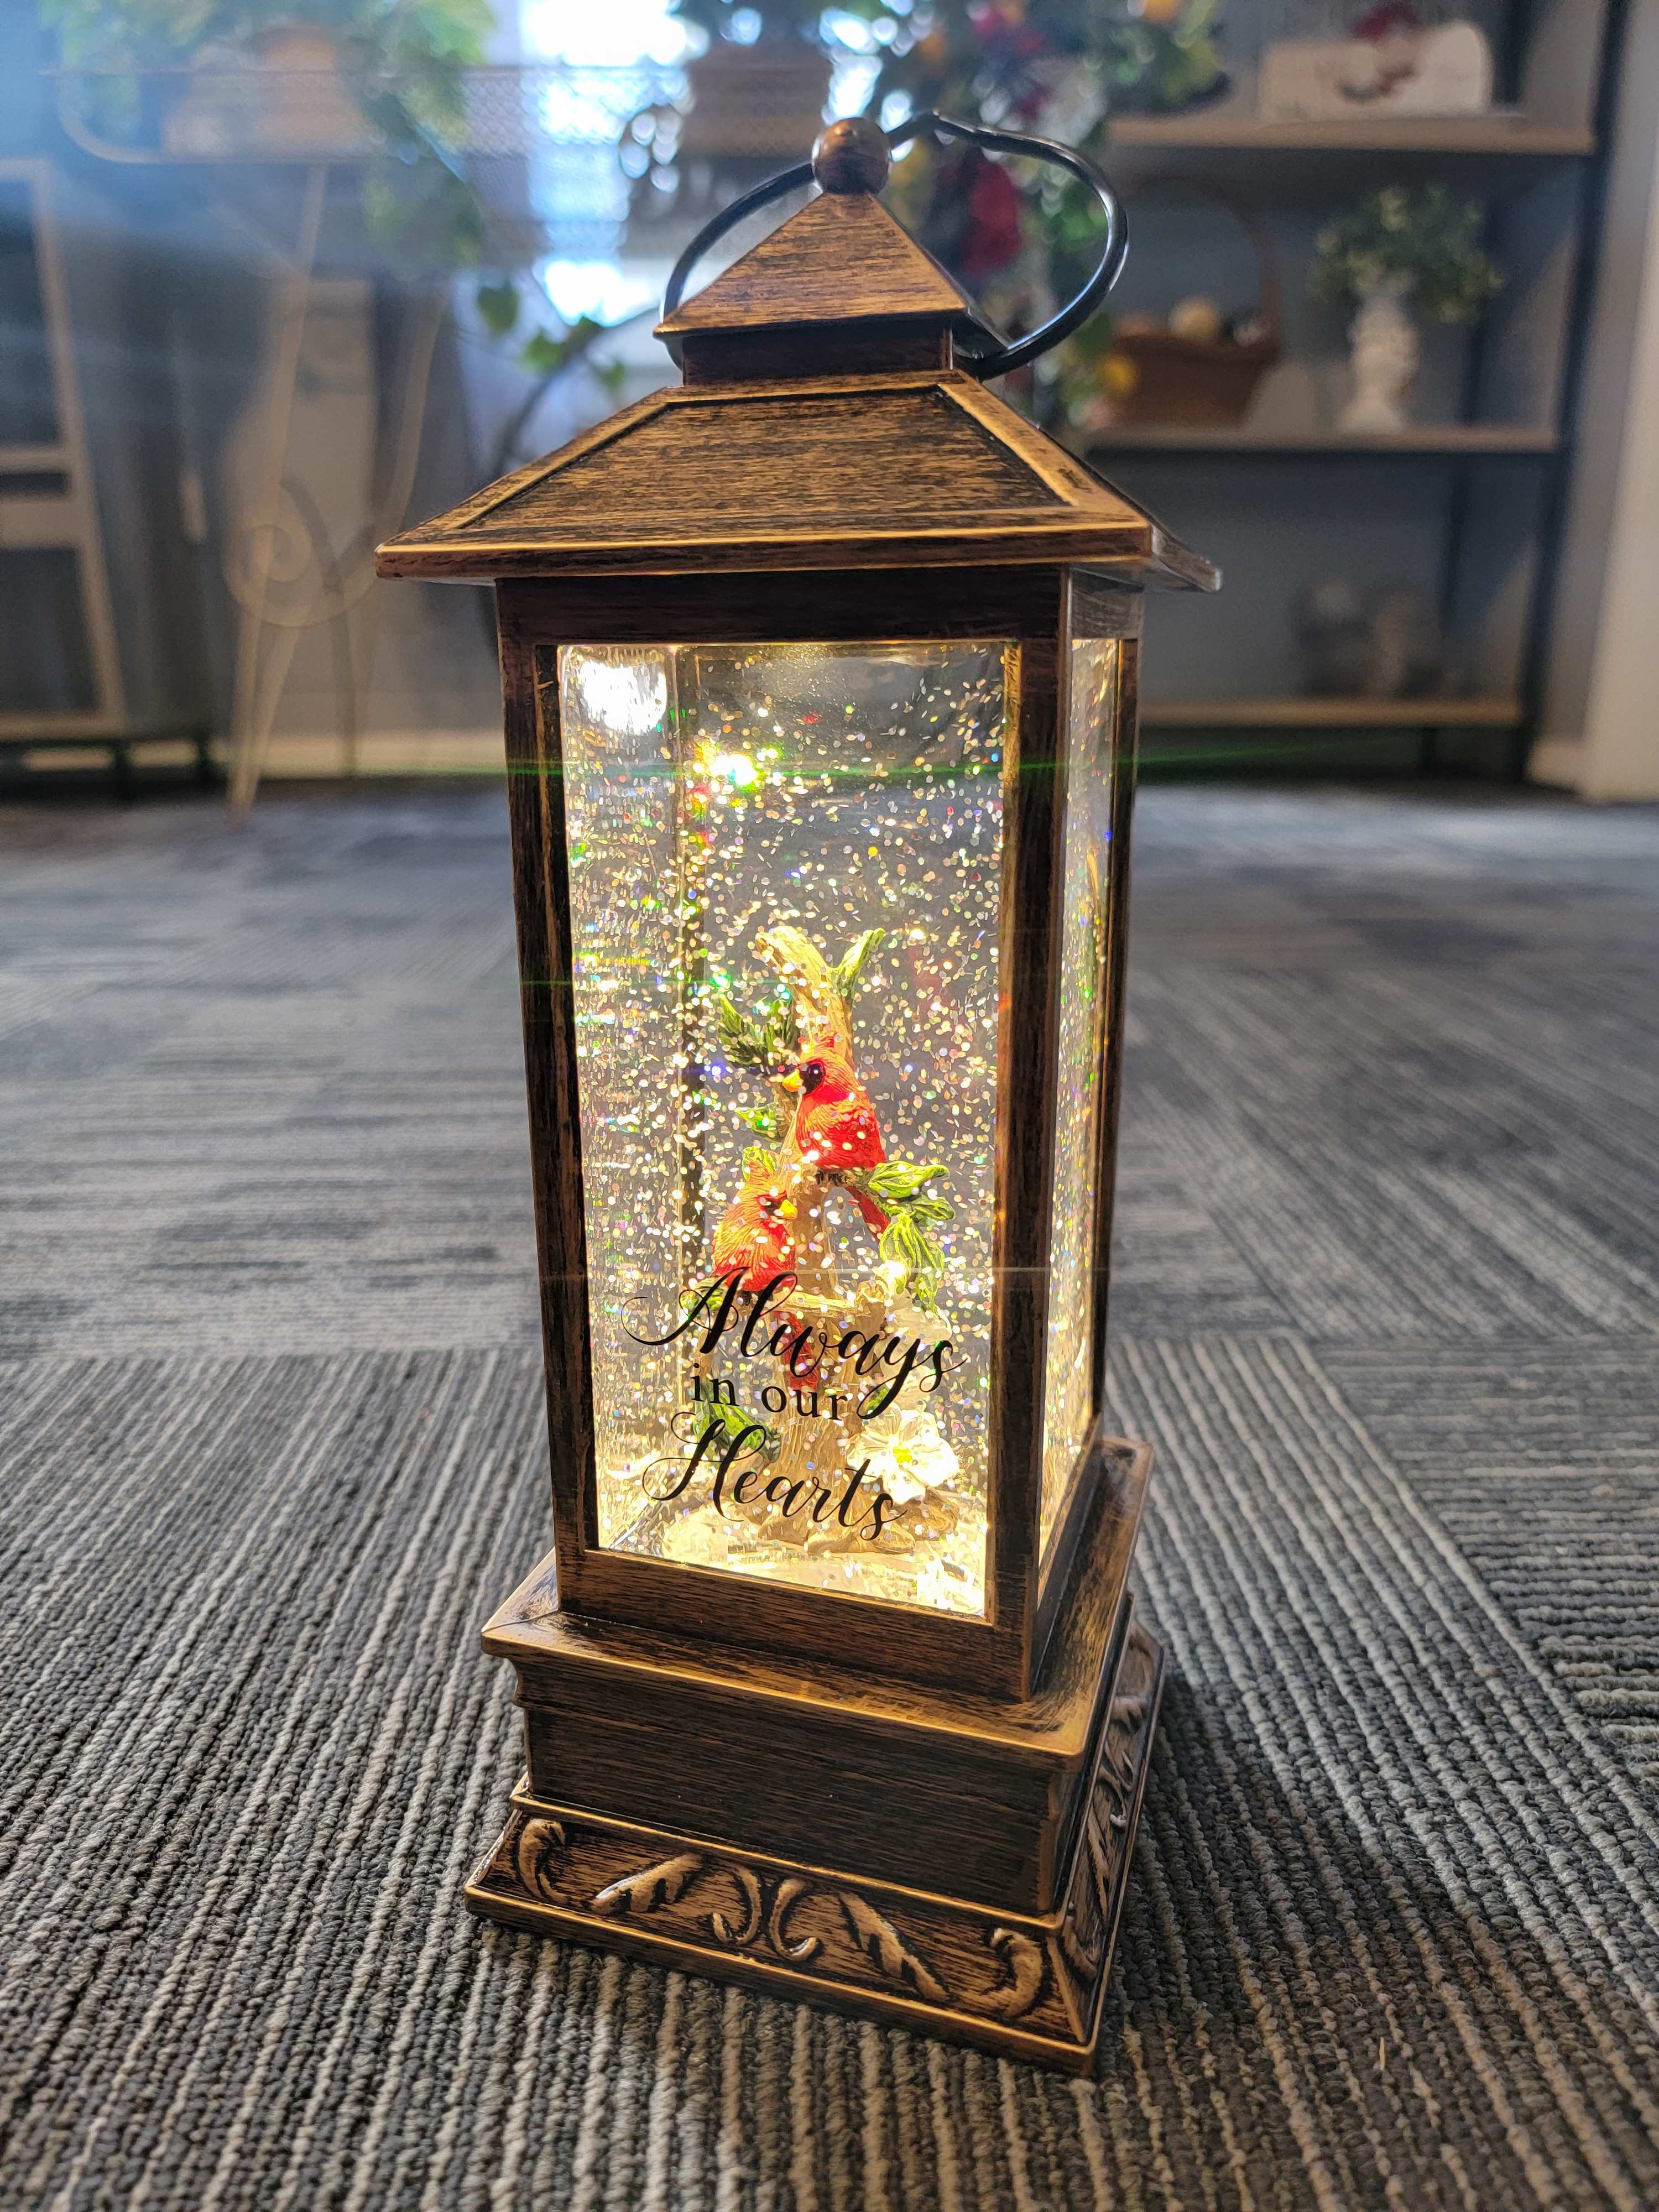 &quot;Cardinals&quot; Water Glitter Lantern - &quot;Always in Our Hearts&quot; Glittern Lantern Our water glitter lanterns are designed with quality and sentiment in mind. The high-quality polyresin lantern features a built-in light and circulator for swirling glitter. The light also features an automatic timer that turns the light on for 6hrs and back off for 18hrs. The lantern will come with AAA batteries and we will add a bow and card for personalization. The lantern is about 12 inches tall.